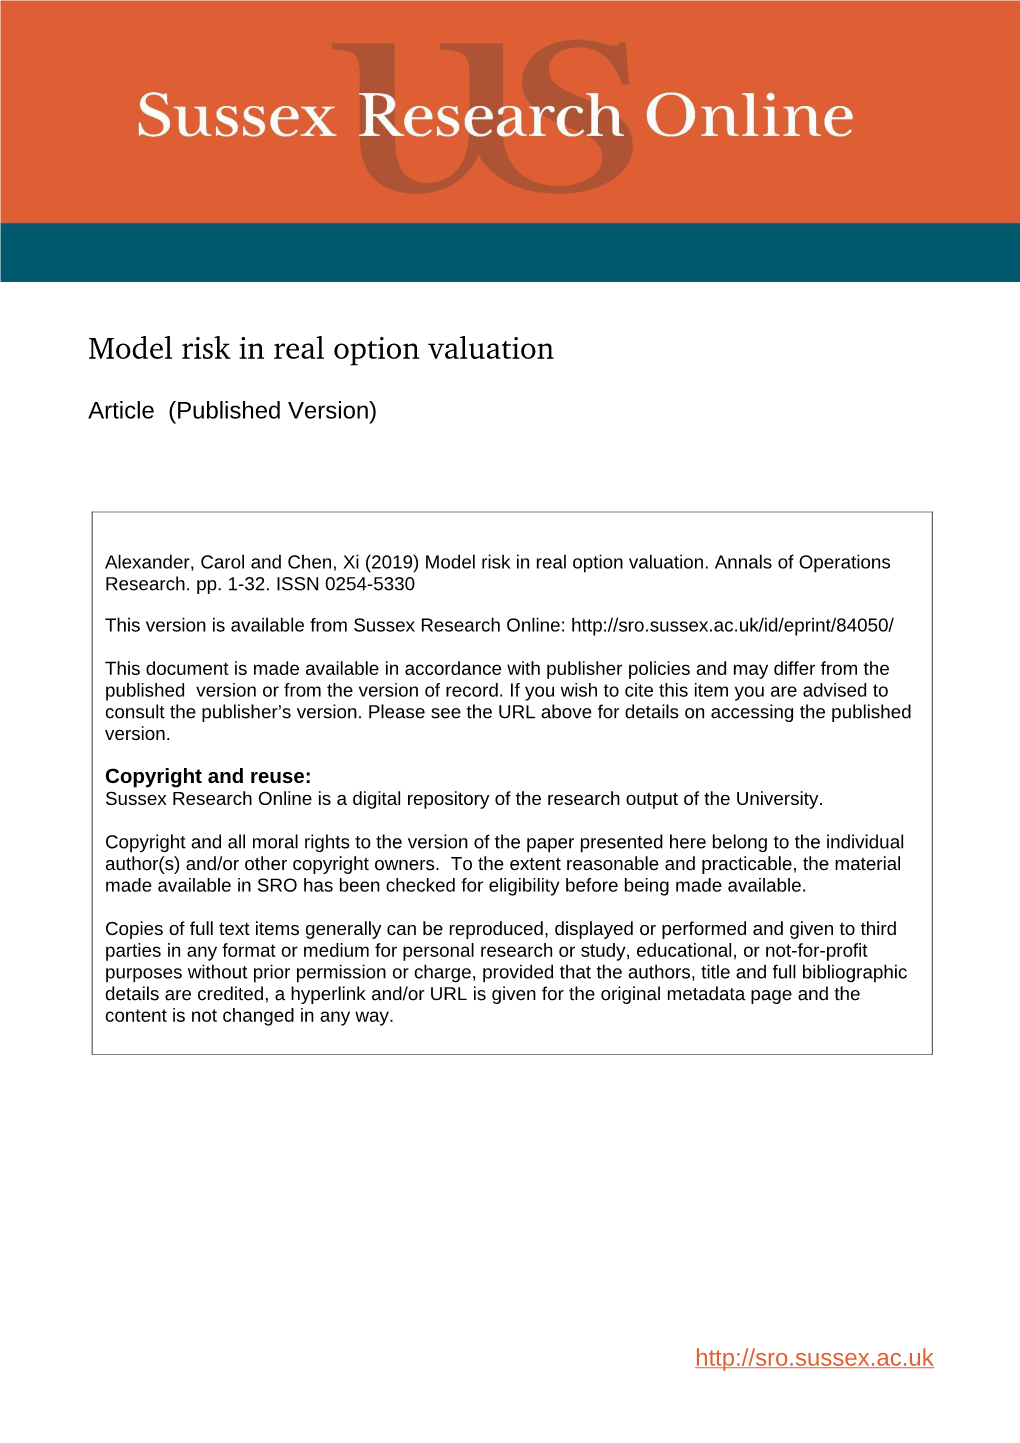 Model Risk in Real Option Valuation